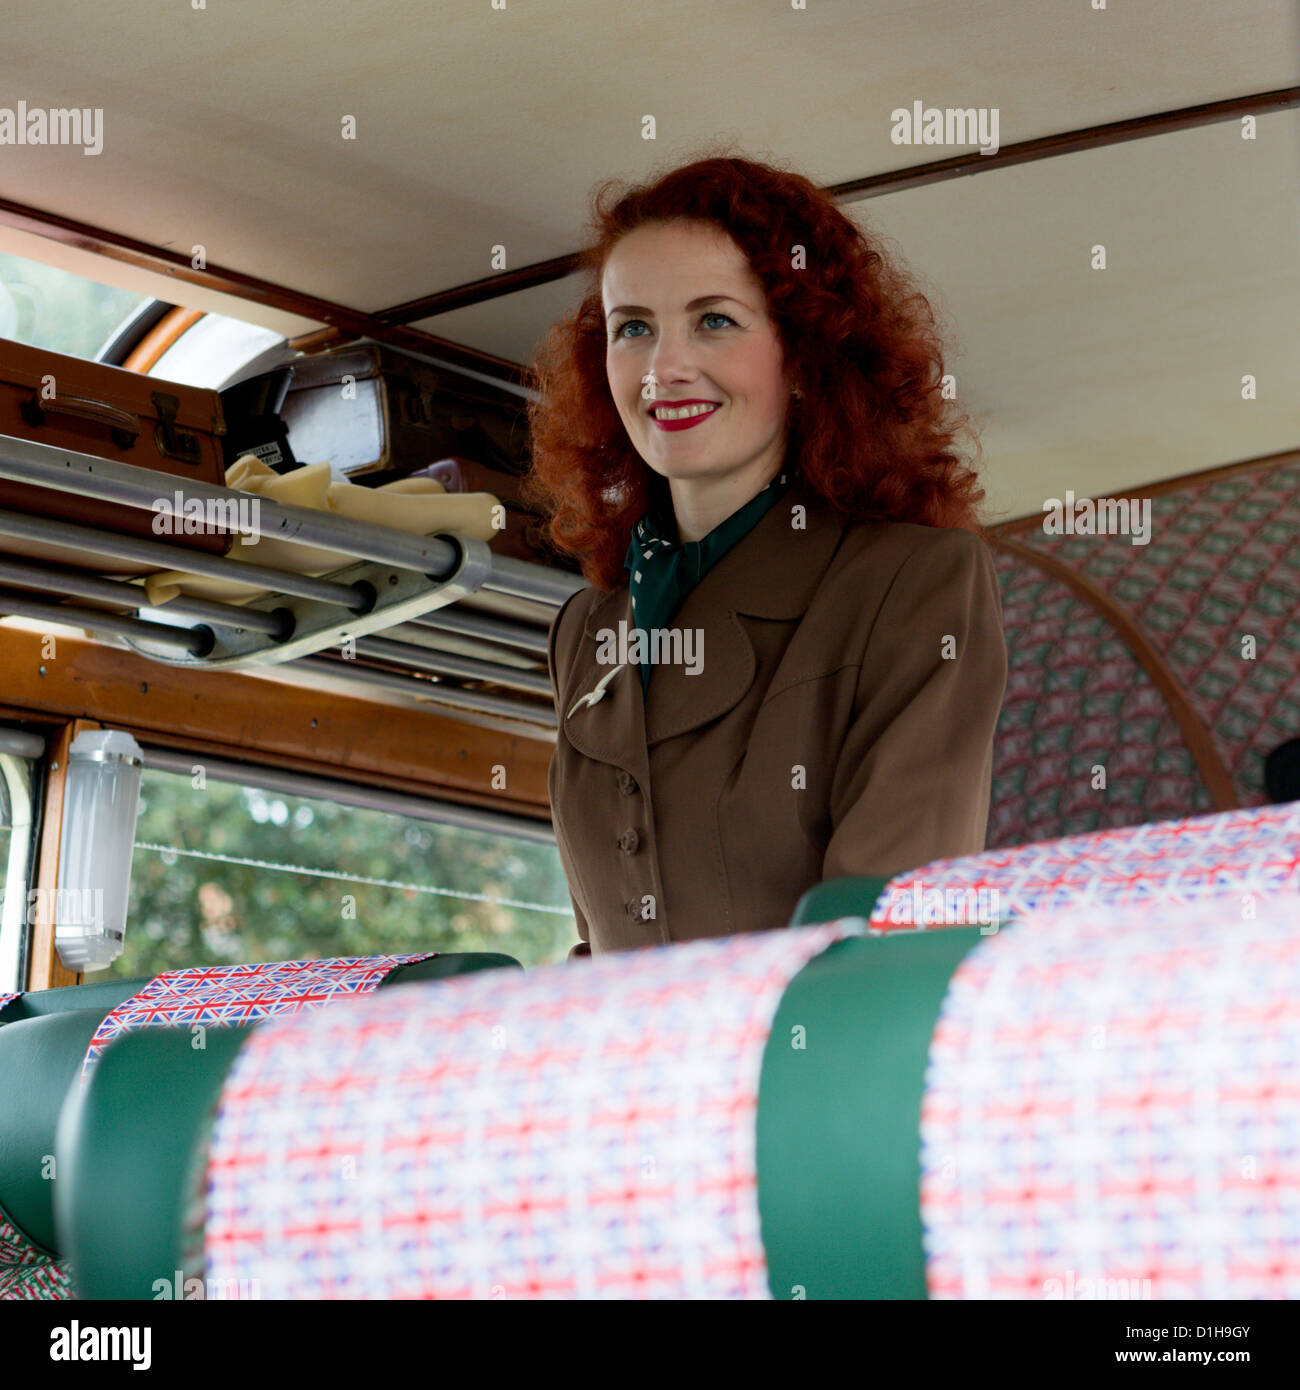 Lola Lamour - singer & entertainer recreating the 1940's era here in a 1949 Bedford Coach Stock Photo